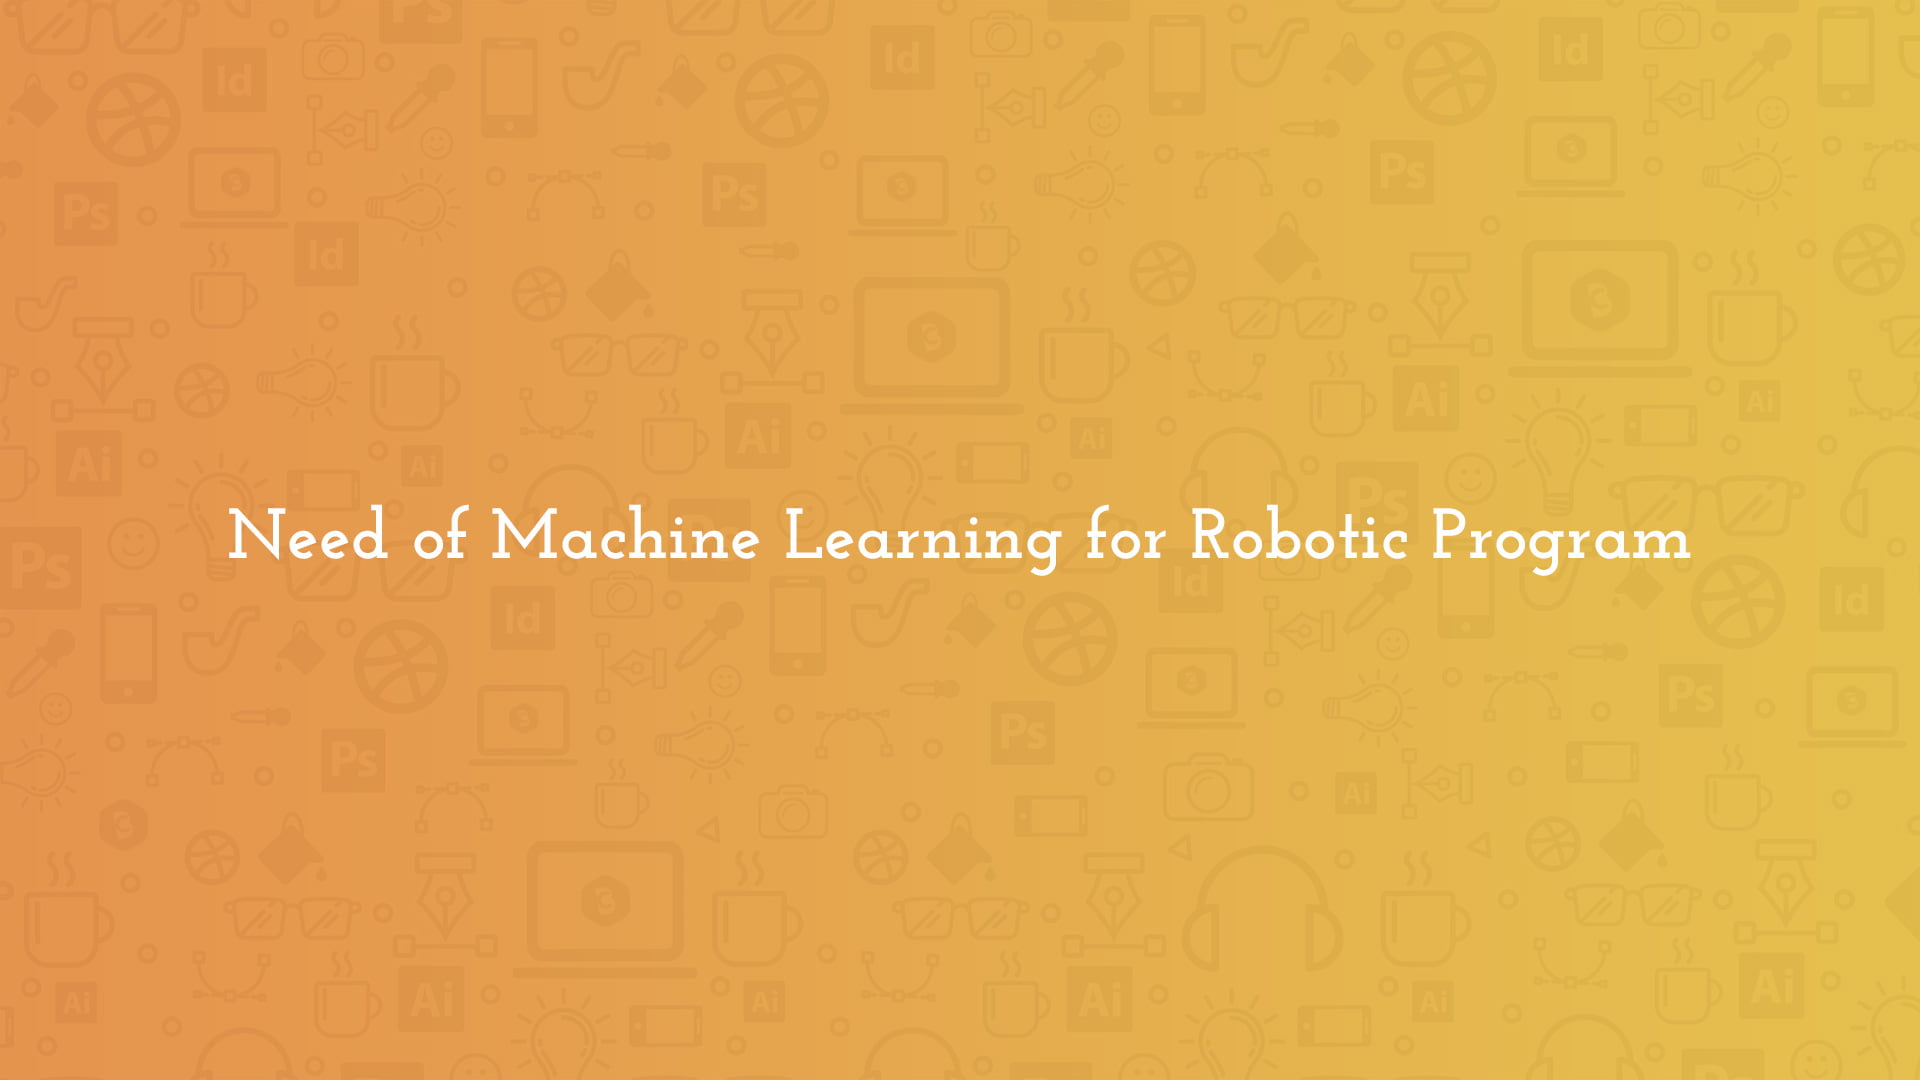 Need of Machine Learning for Robotic Program